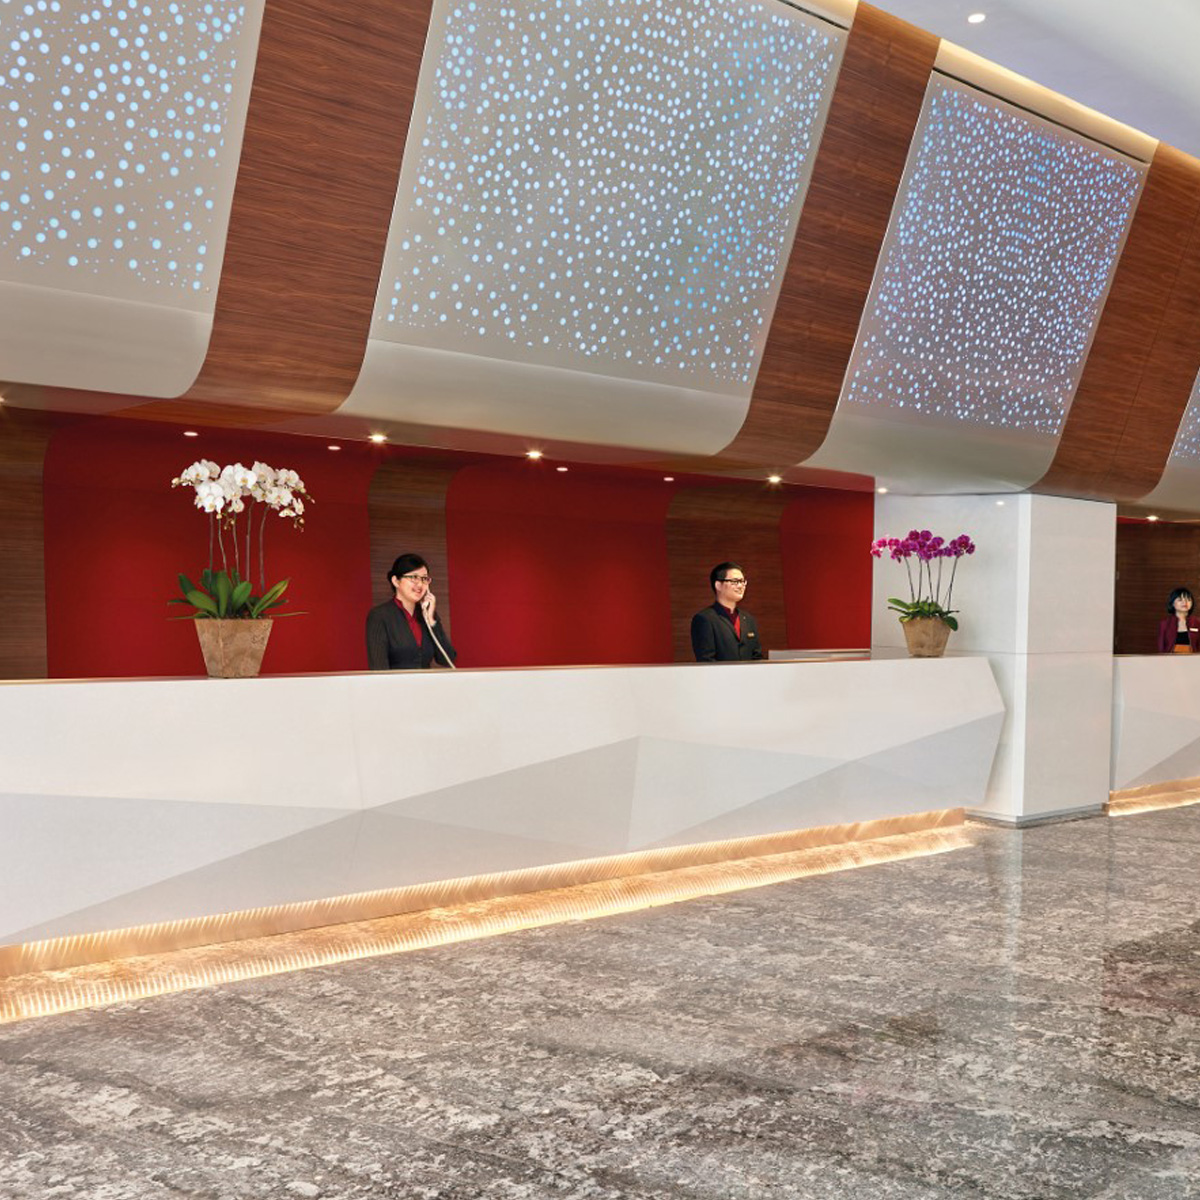 The front office of Sunway Pyramid Hotel where guests may check in, adorned with red walls and lit walls.